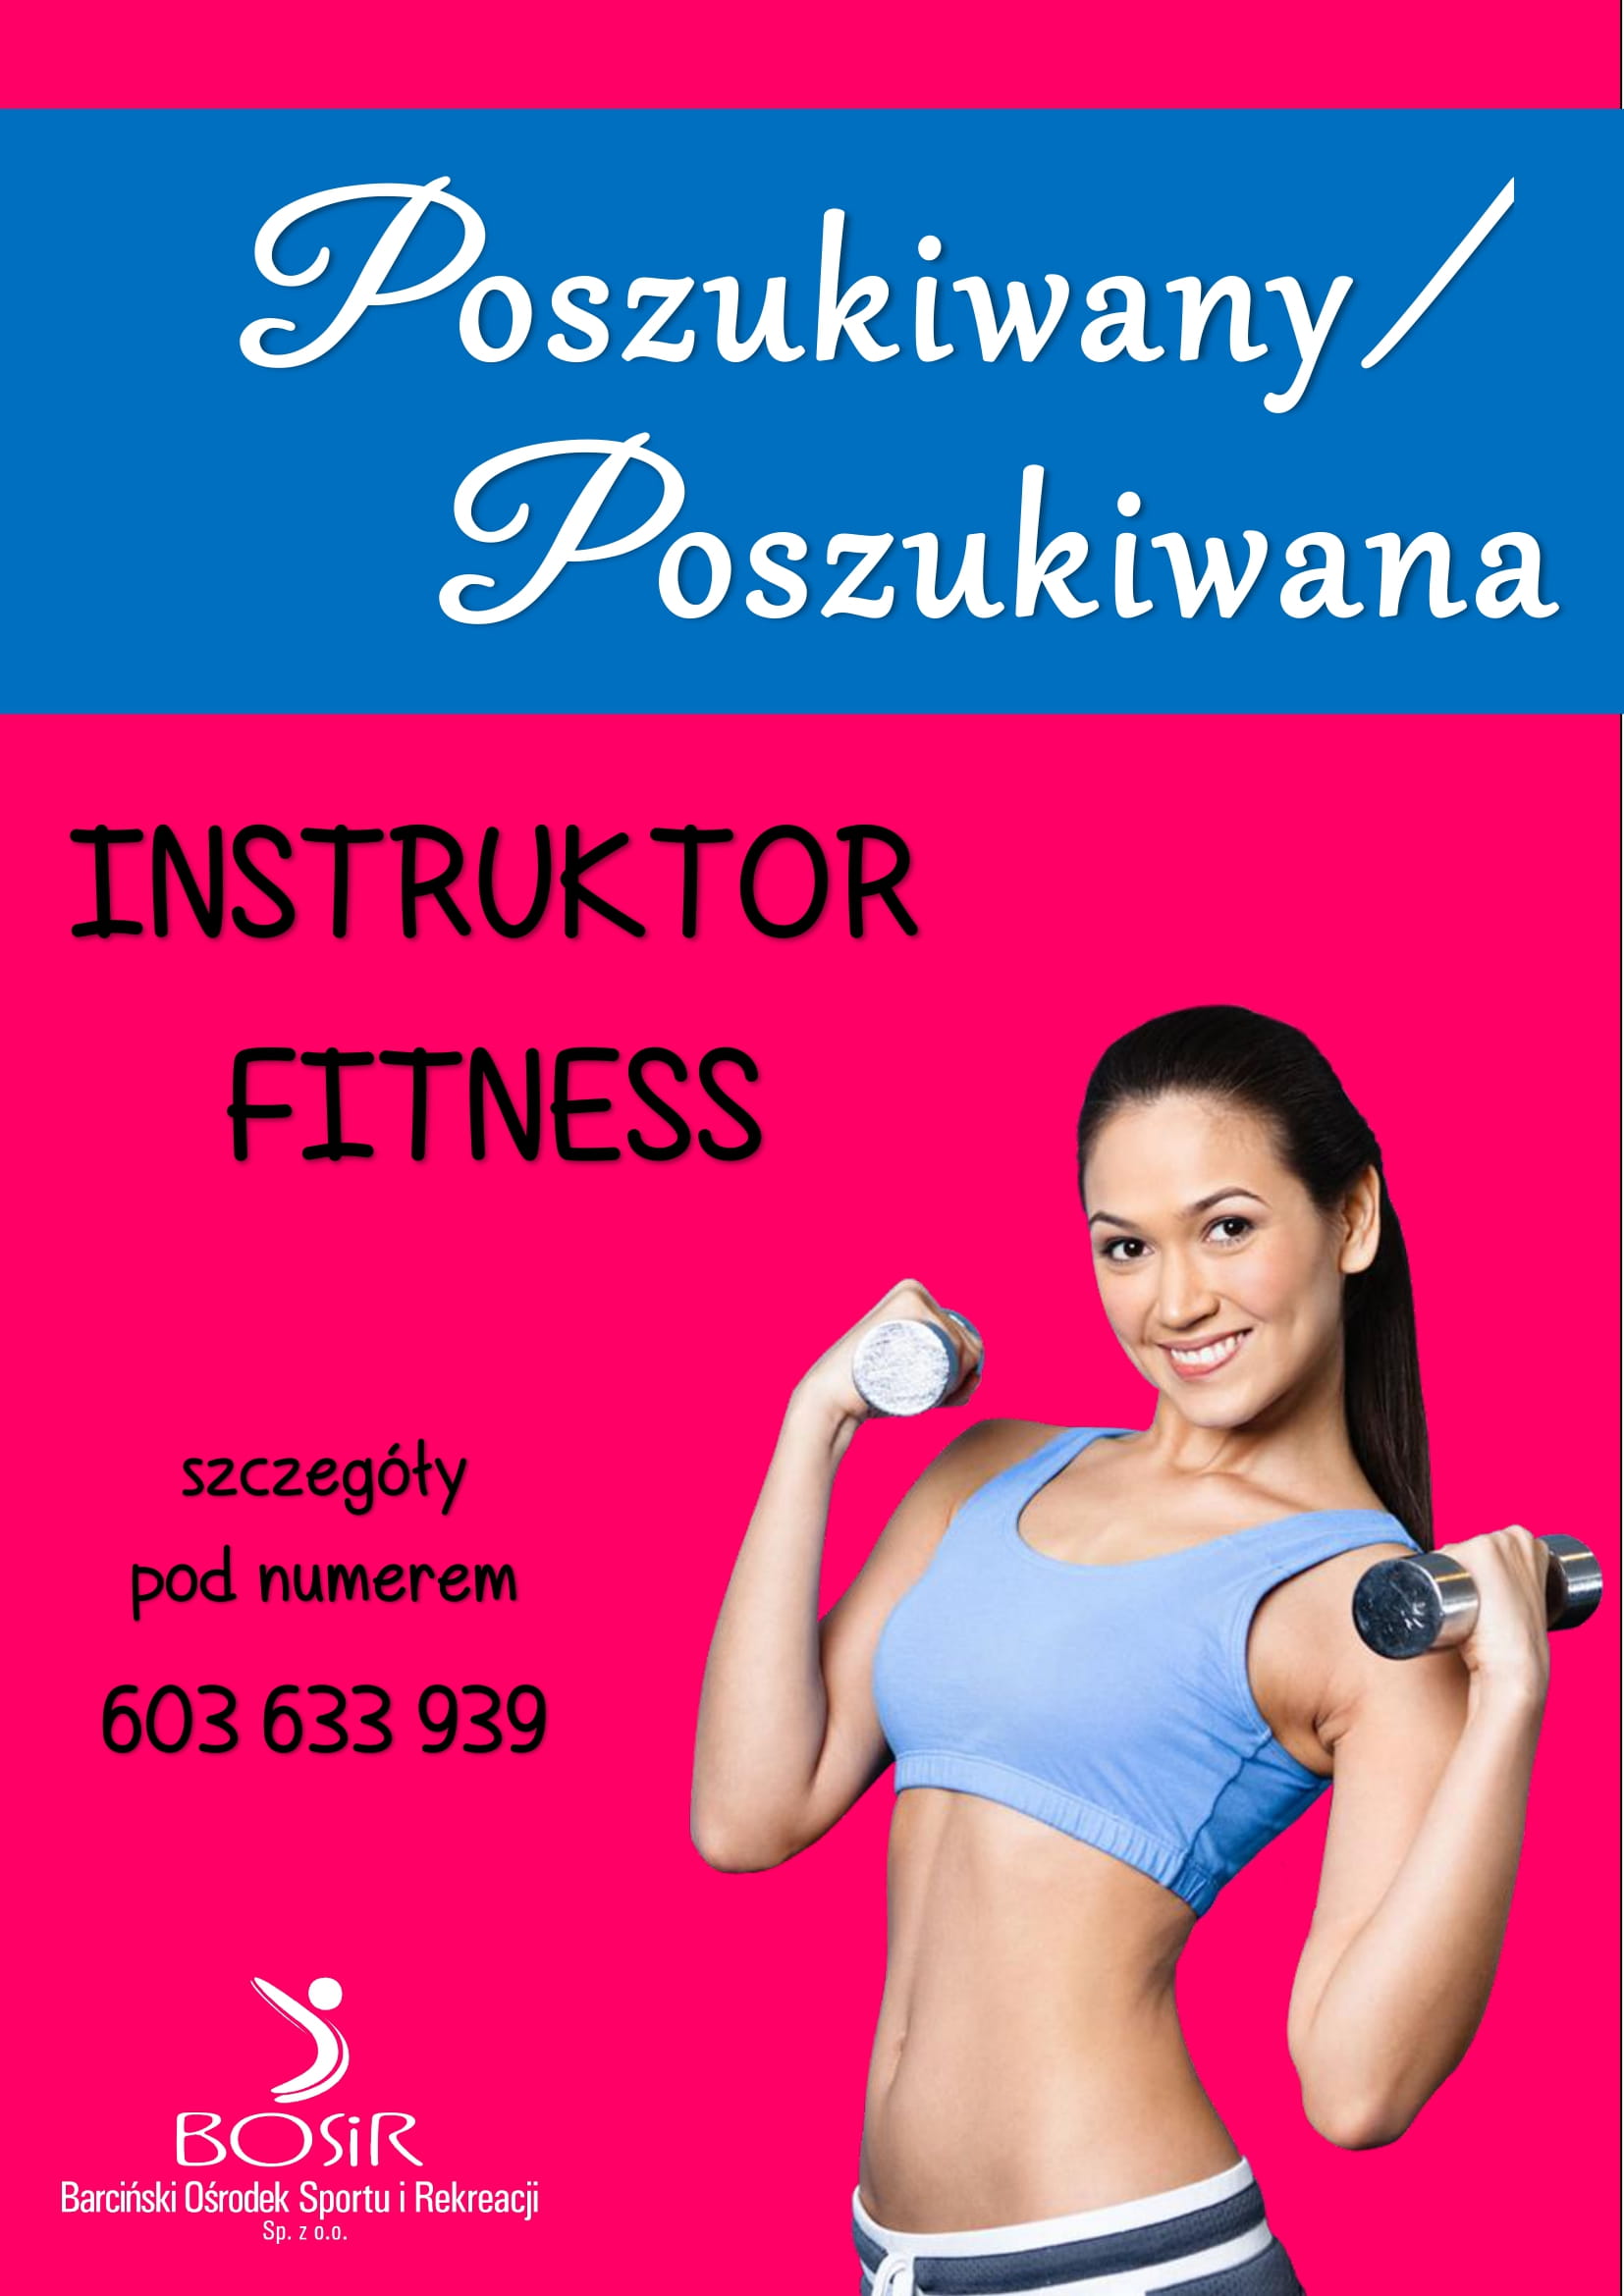 You are currently viewing Poszukiwany instruktor fitness